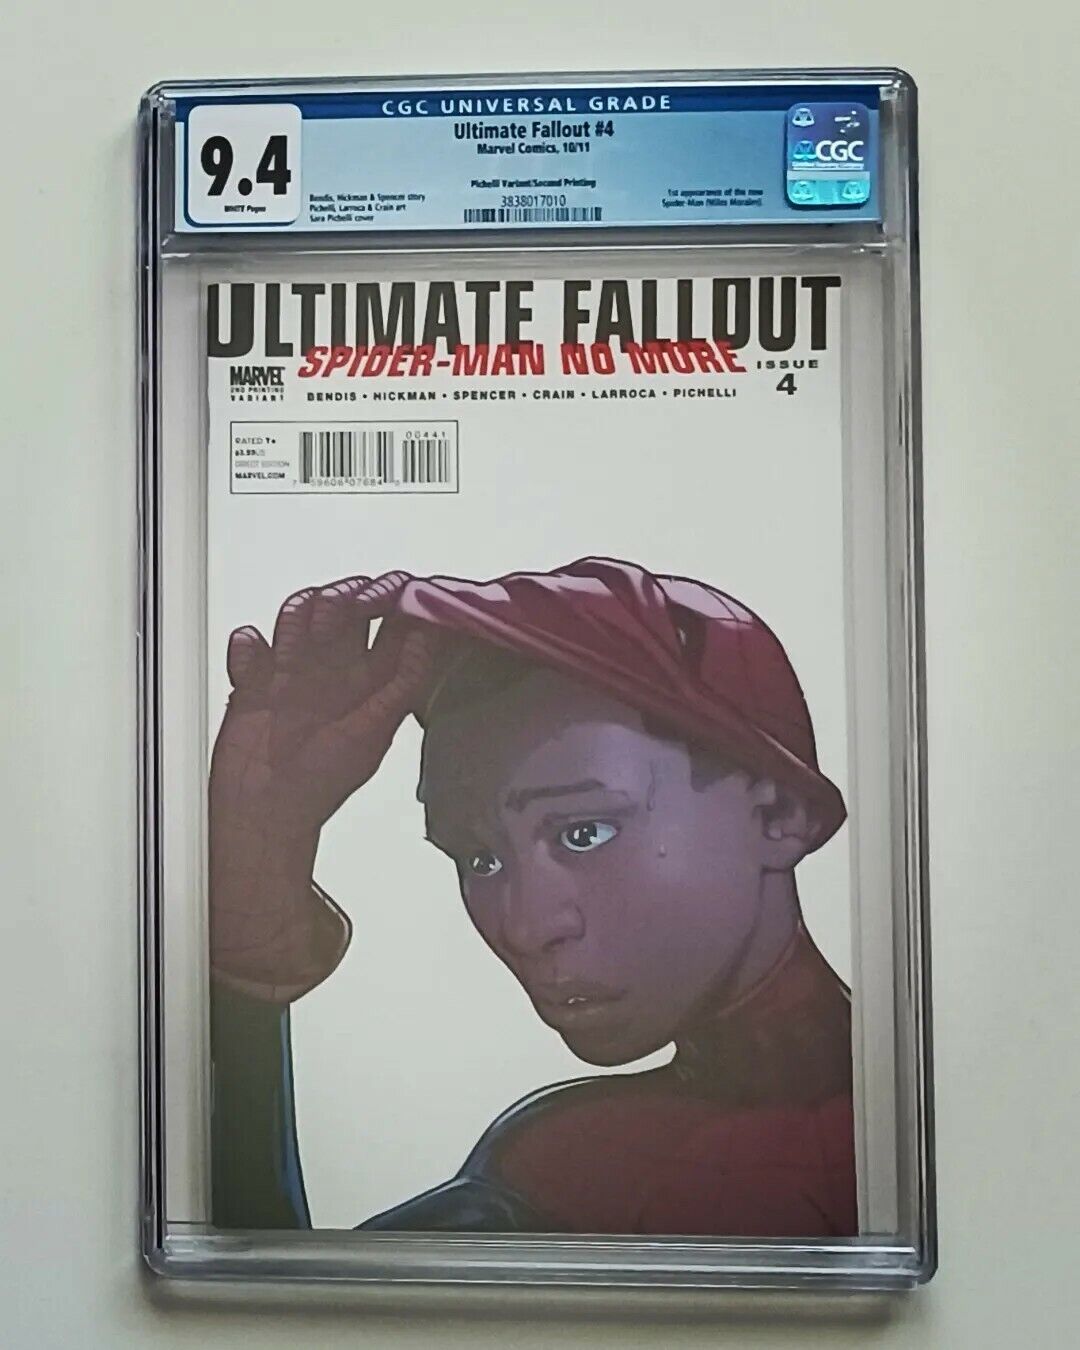 ULTIMATE FALLOUT #4 CGC 9.4 NEWTON RINGS Pichelli Variant Cvr 2011 MILES MORALES